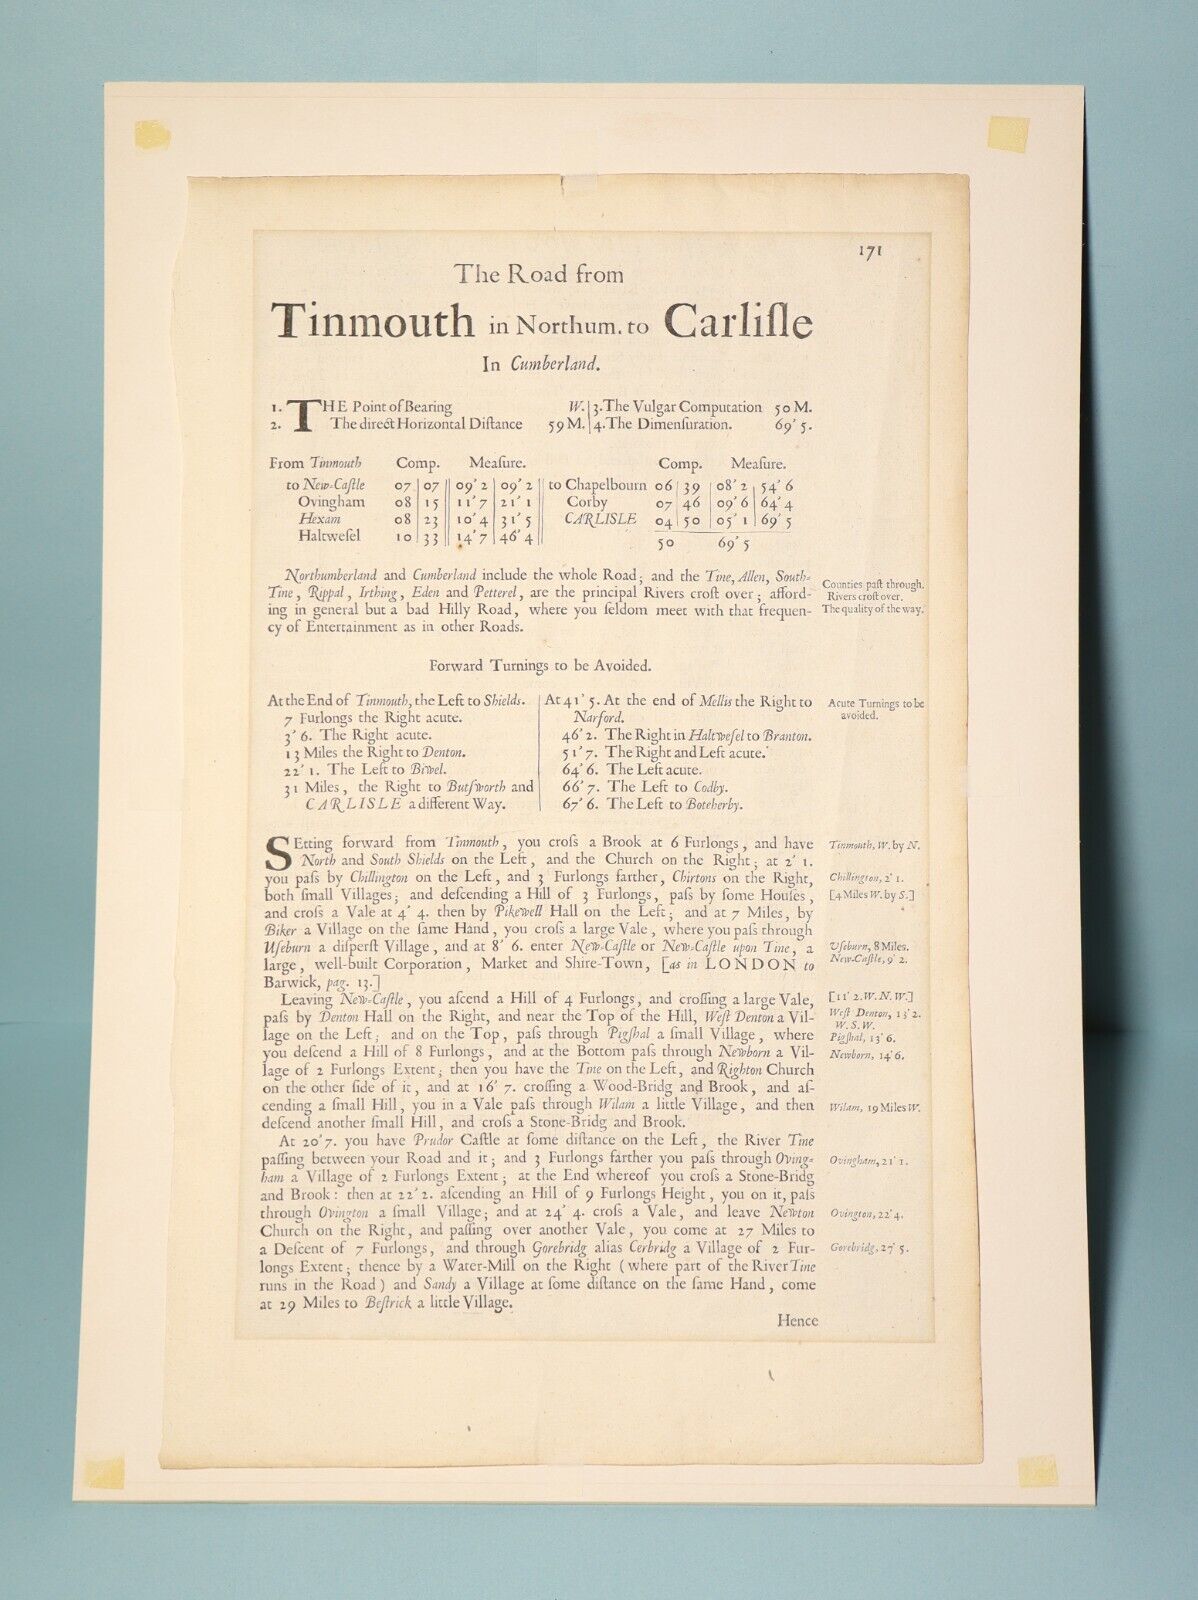 18thC page The Road from Tinmouth in Northum. to Carlisle in Cumberland